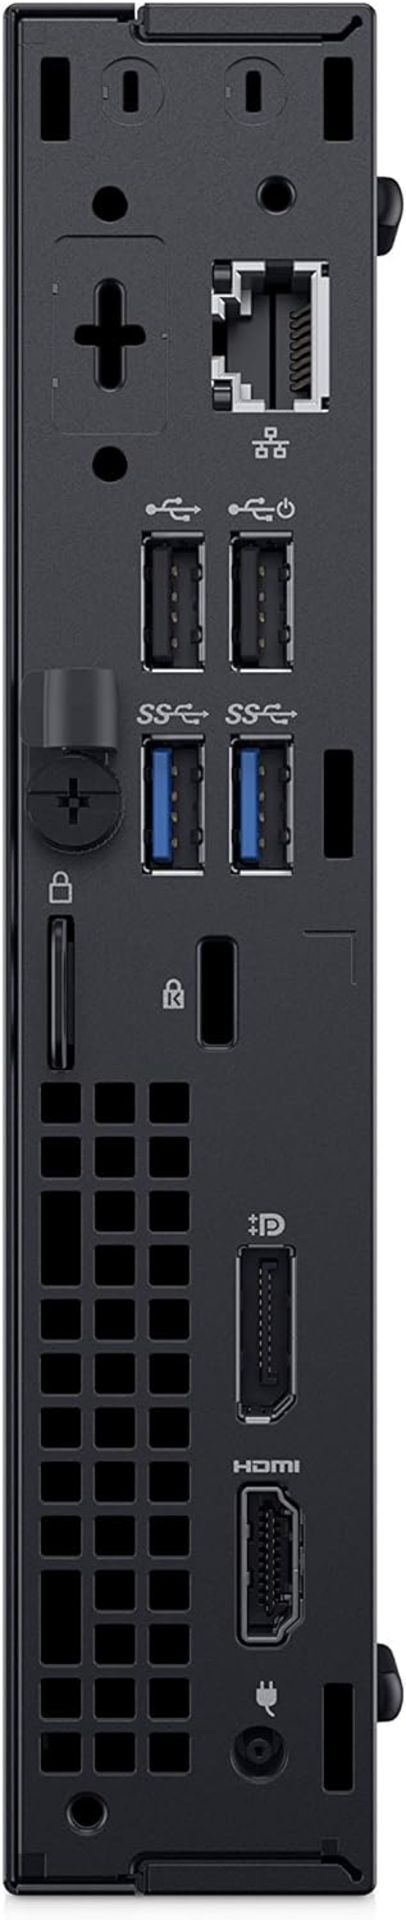 DELL OPTIPLEX 3070 USFF PC WITH INTEL I3-9100T - 9TH GEN CPU, 4GB RAM, 128GB SSD, POWER ADAPTER & - Image 2 of 4